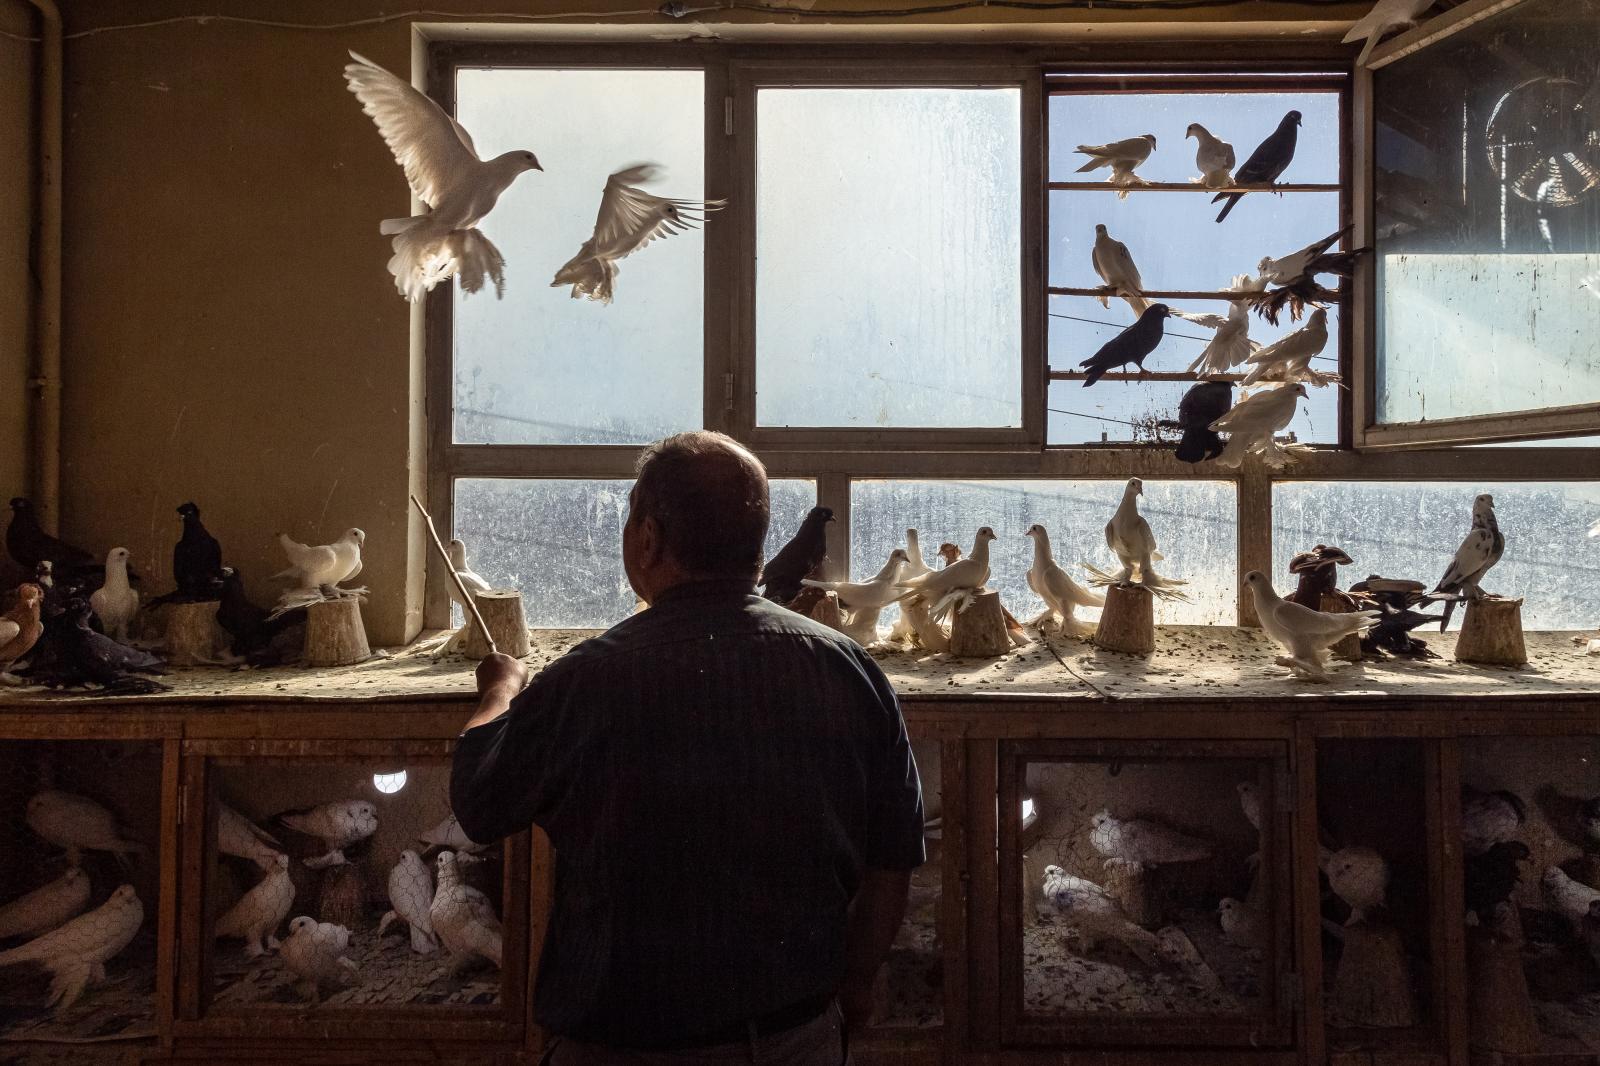 Image from My Planet - Gajili's pigeon seller is playing with his birds....